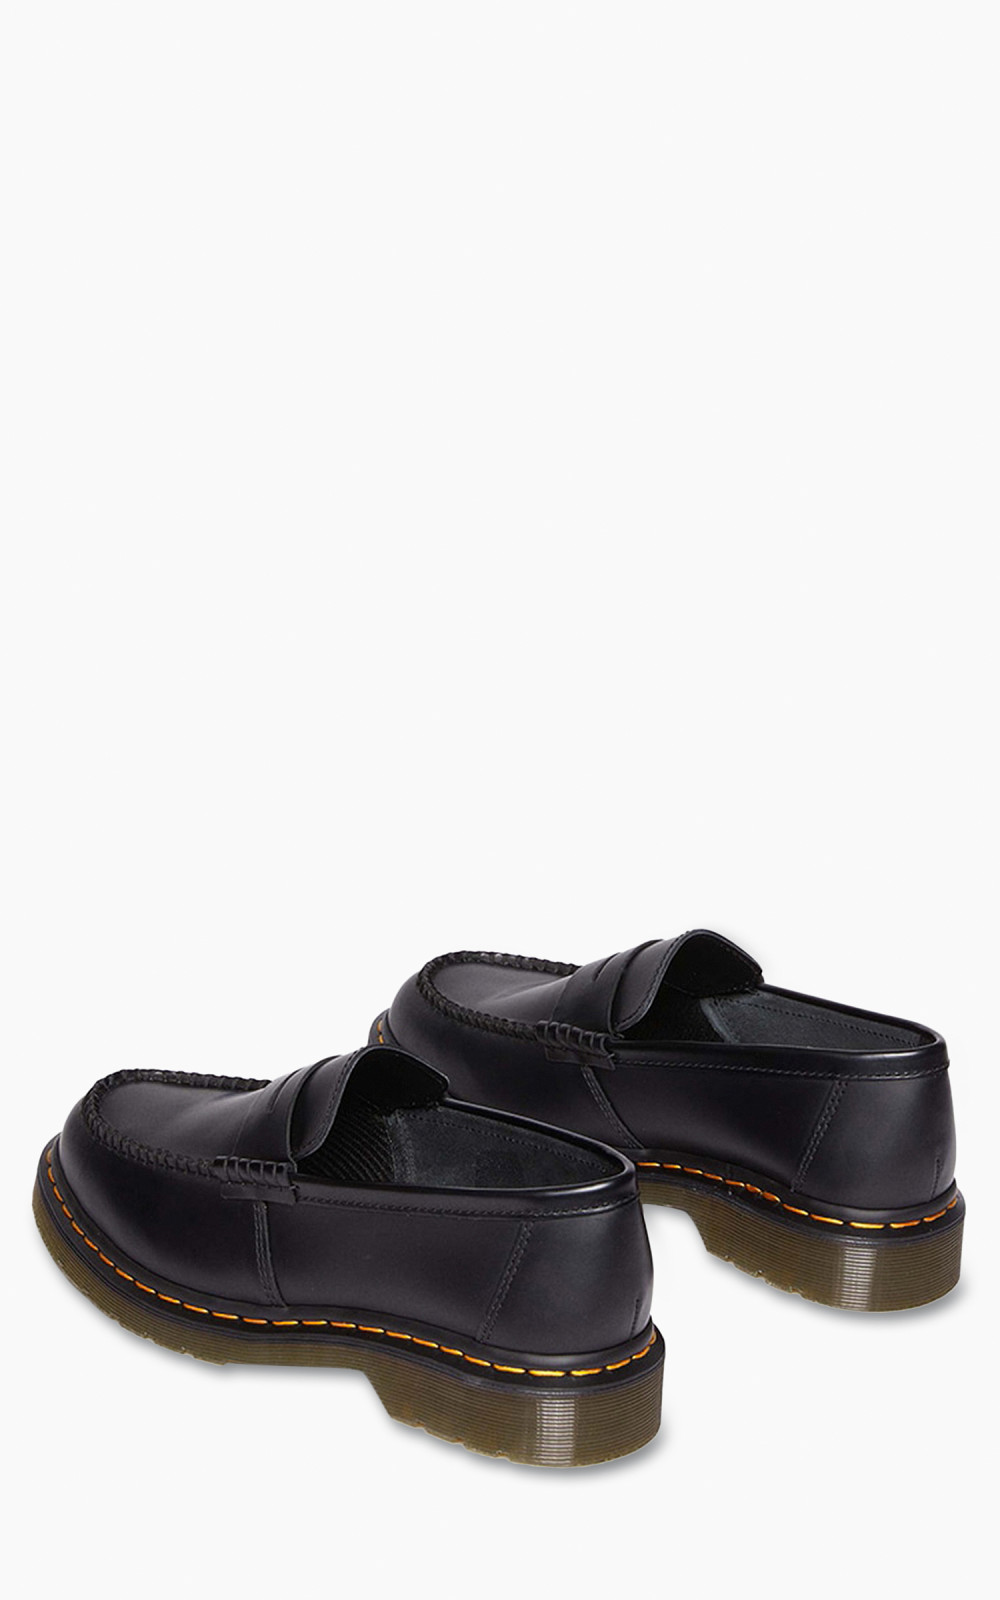 Dr. Martens Penton Smooth Leather Loafers Black | Cultizm